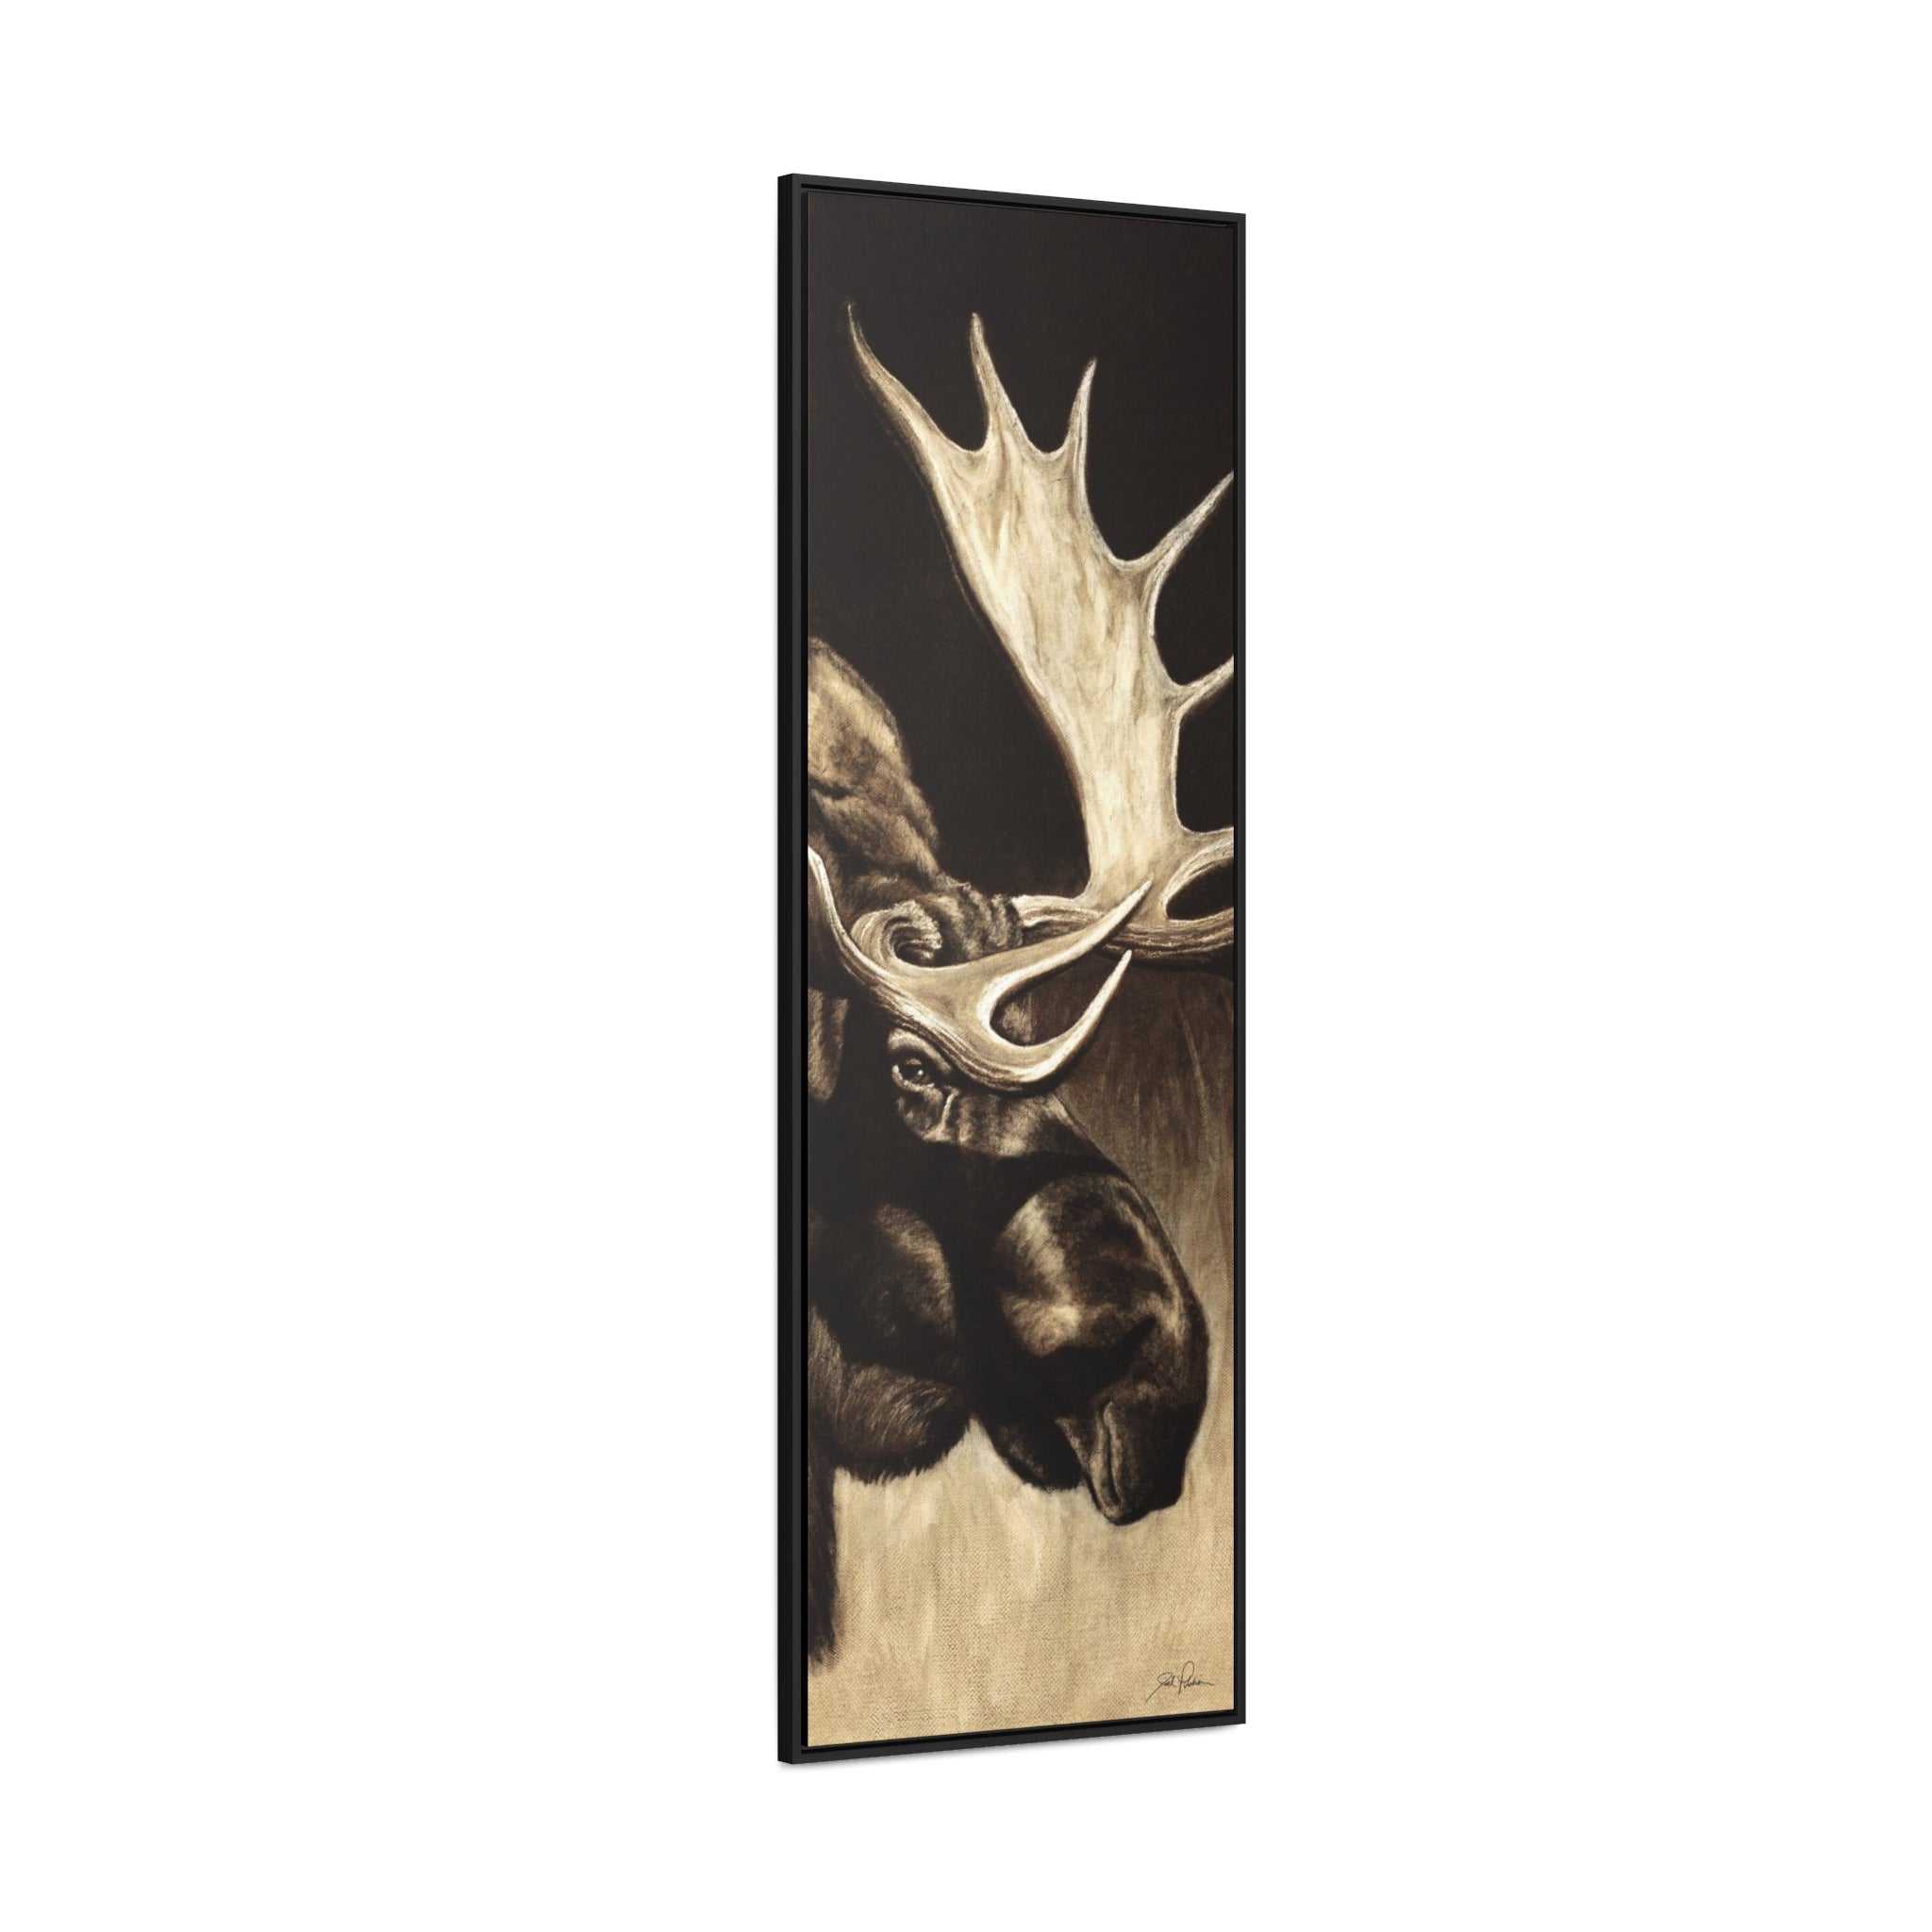 "Mighty Moose" 20x60 Gallery Wrapped/Framed Canvas